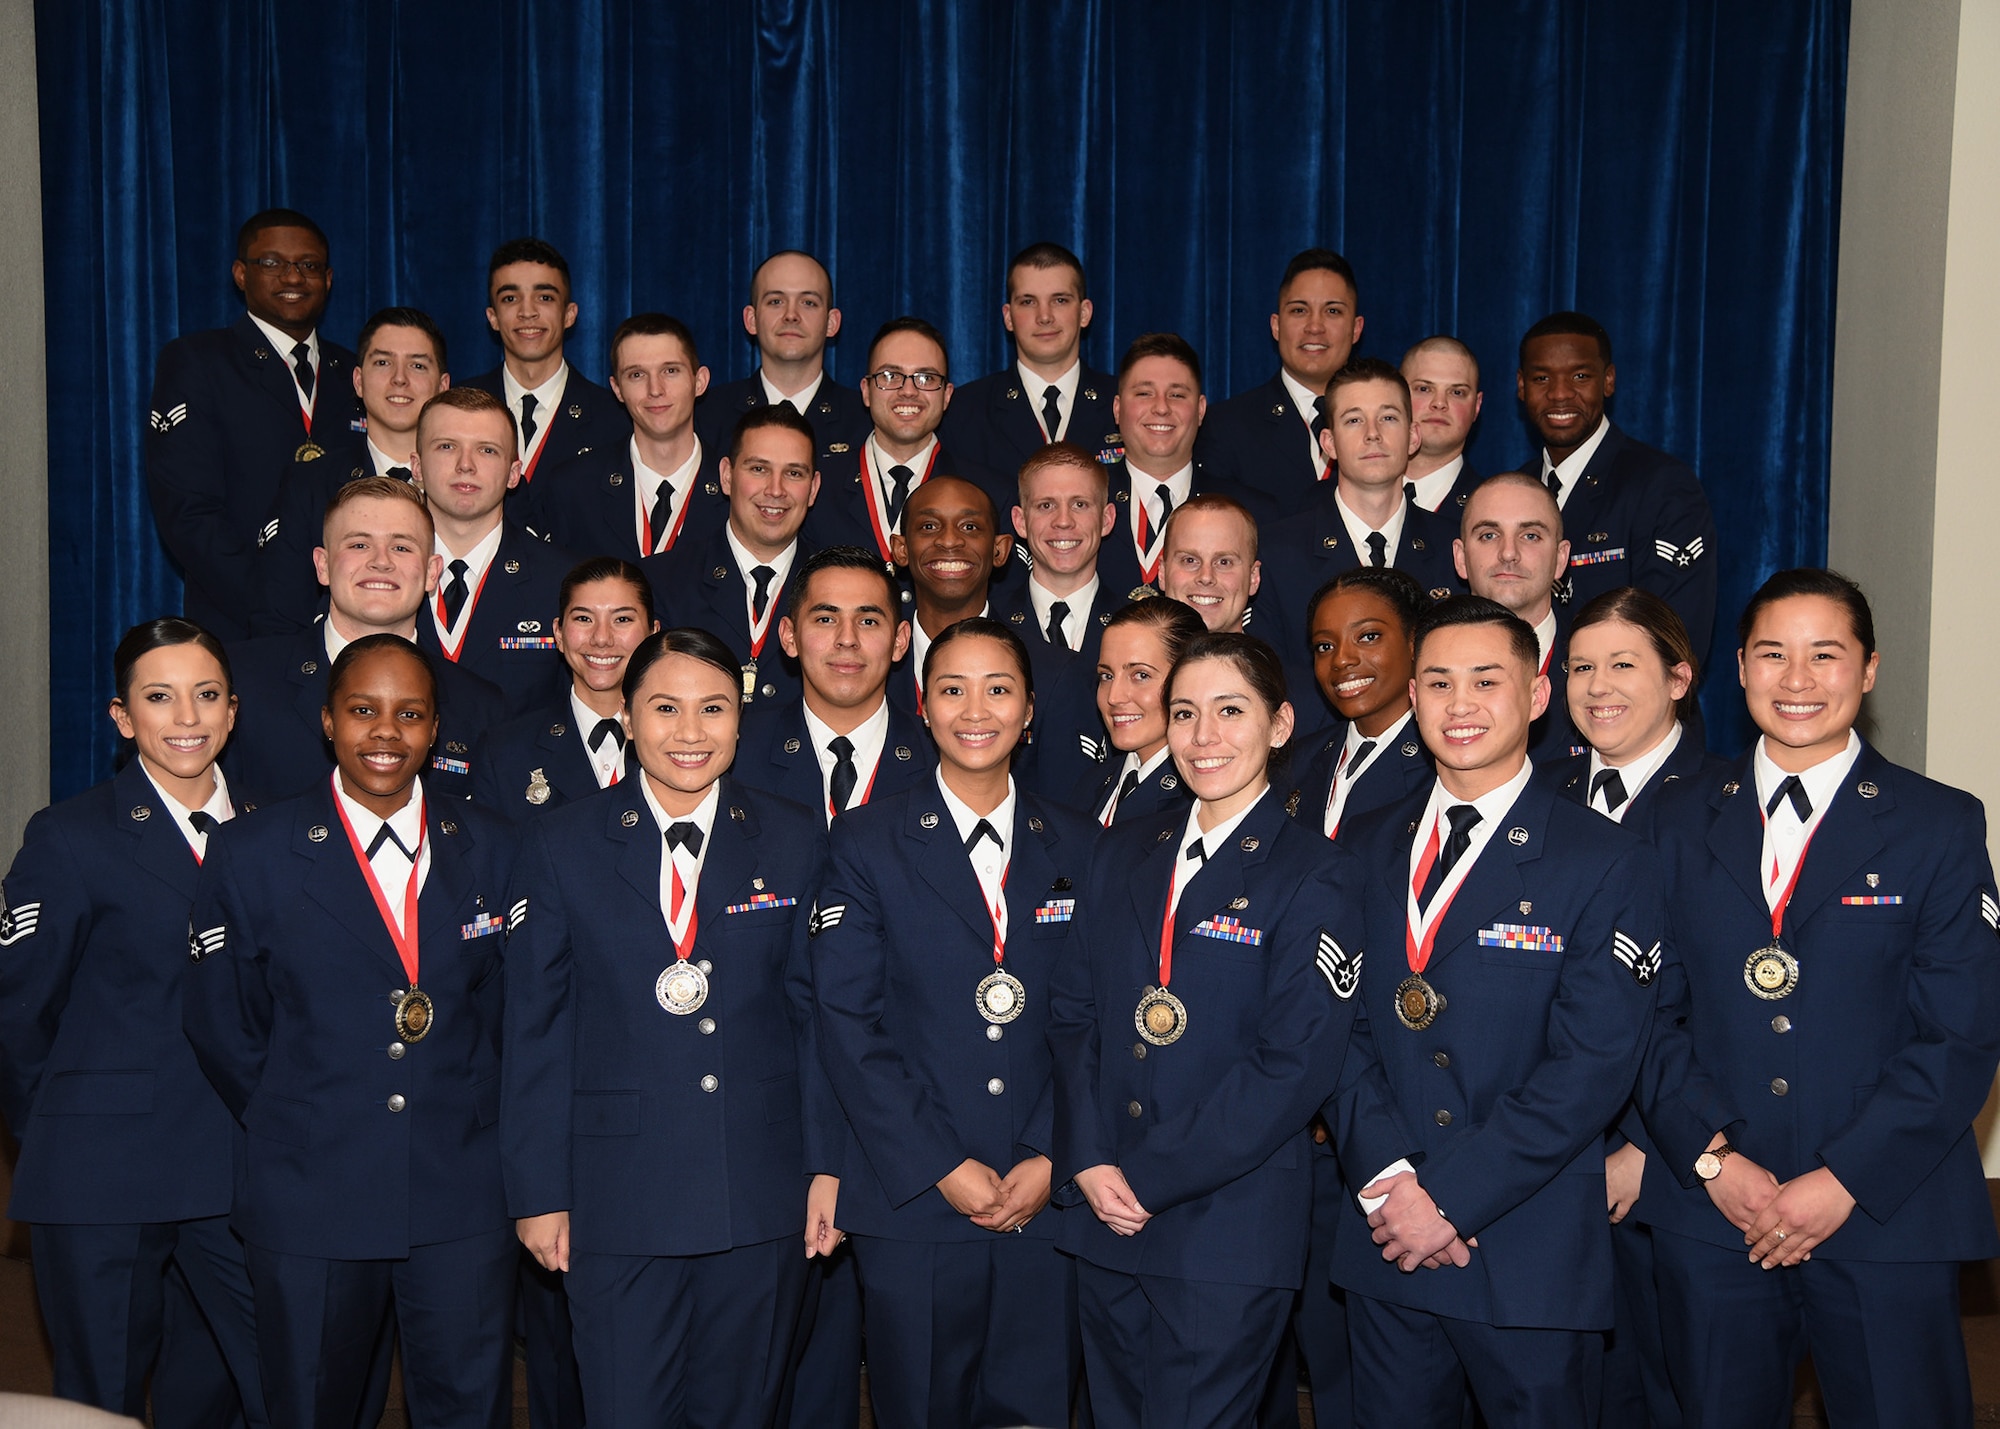 The graduating Airman Leadership School Class 19-C students pose for a photo in the Trail's End Event Center on F.E. Warren Air Force Base, Wyo., Feb. 13, 2019. Enlisted Airmen must complete the rigorous professional military education course before supervising other Airmen.